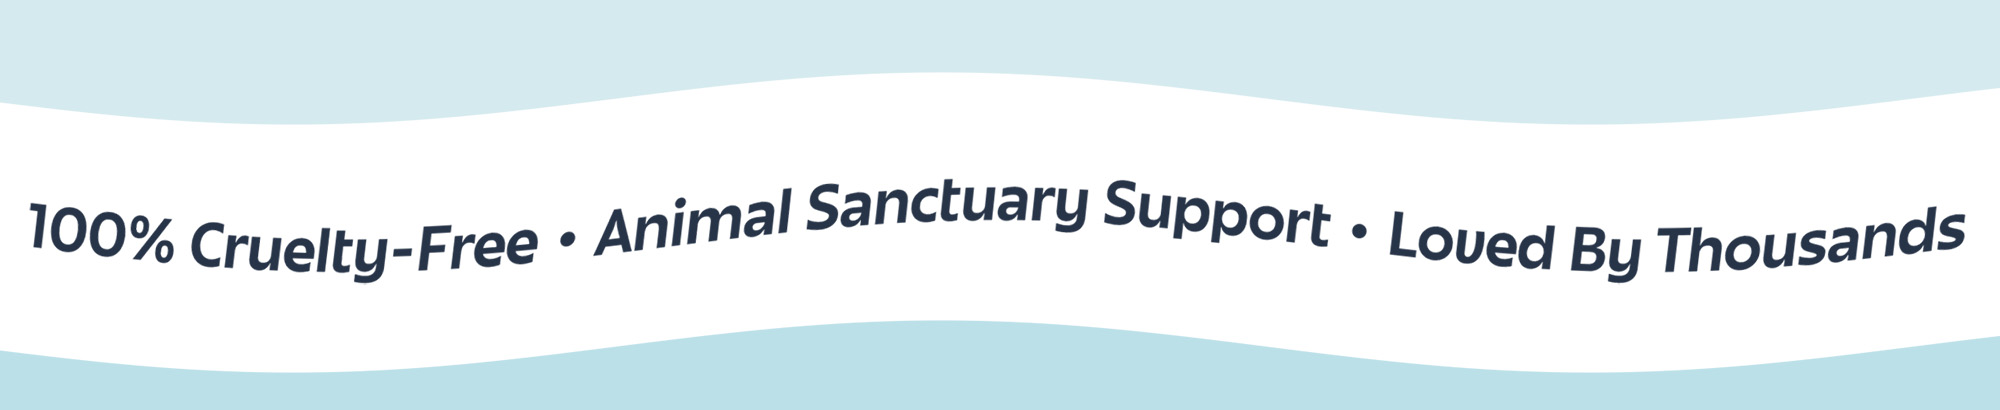 Animal Sanctuary Support Banner